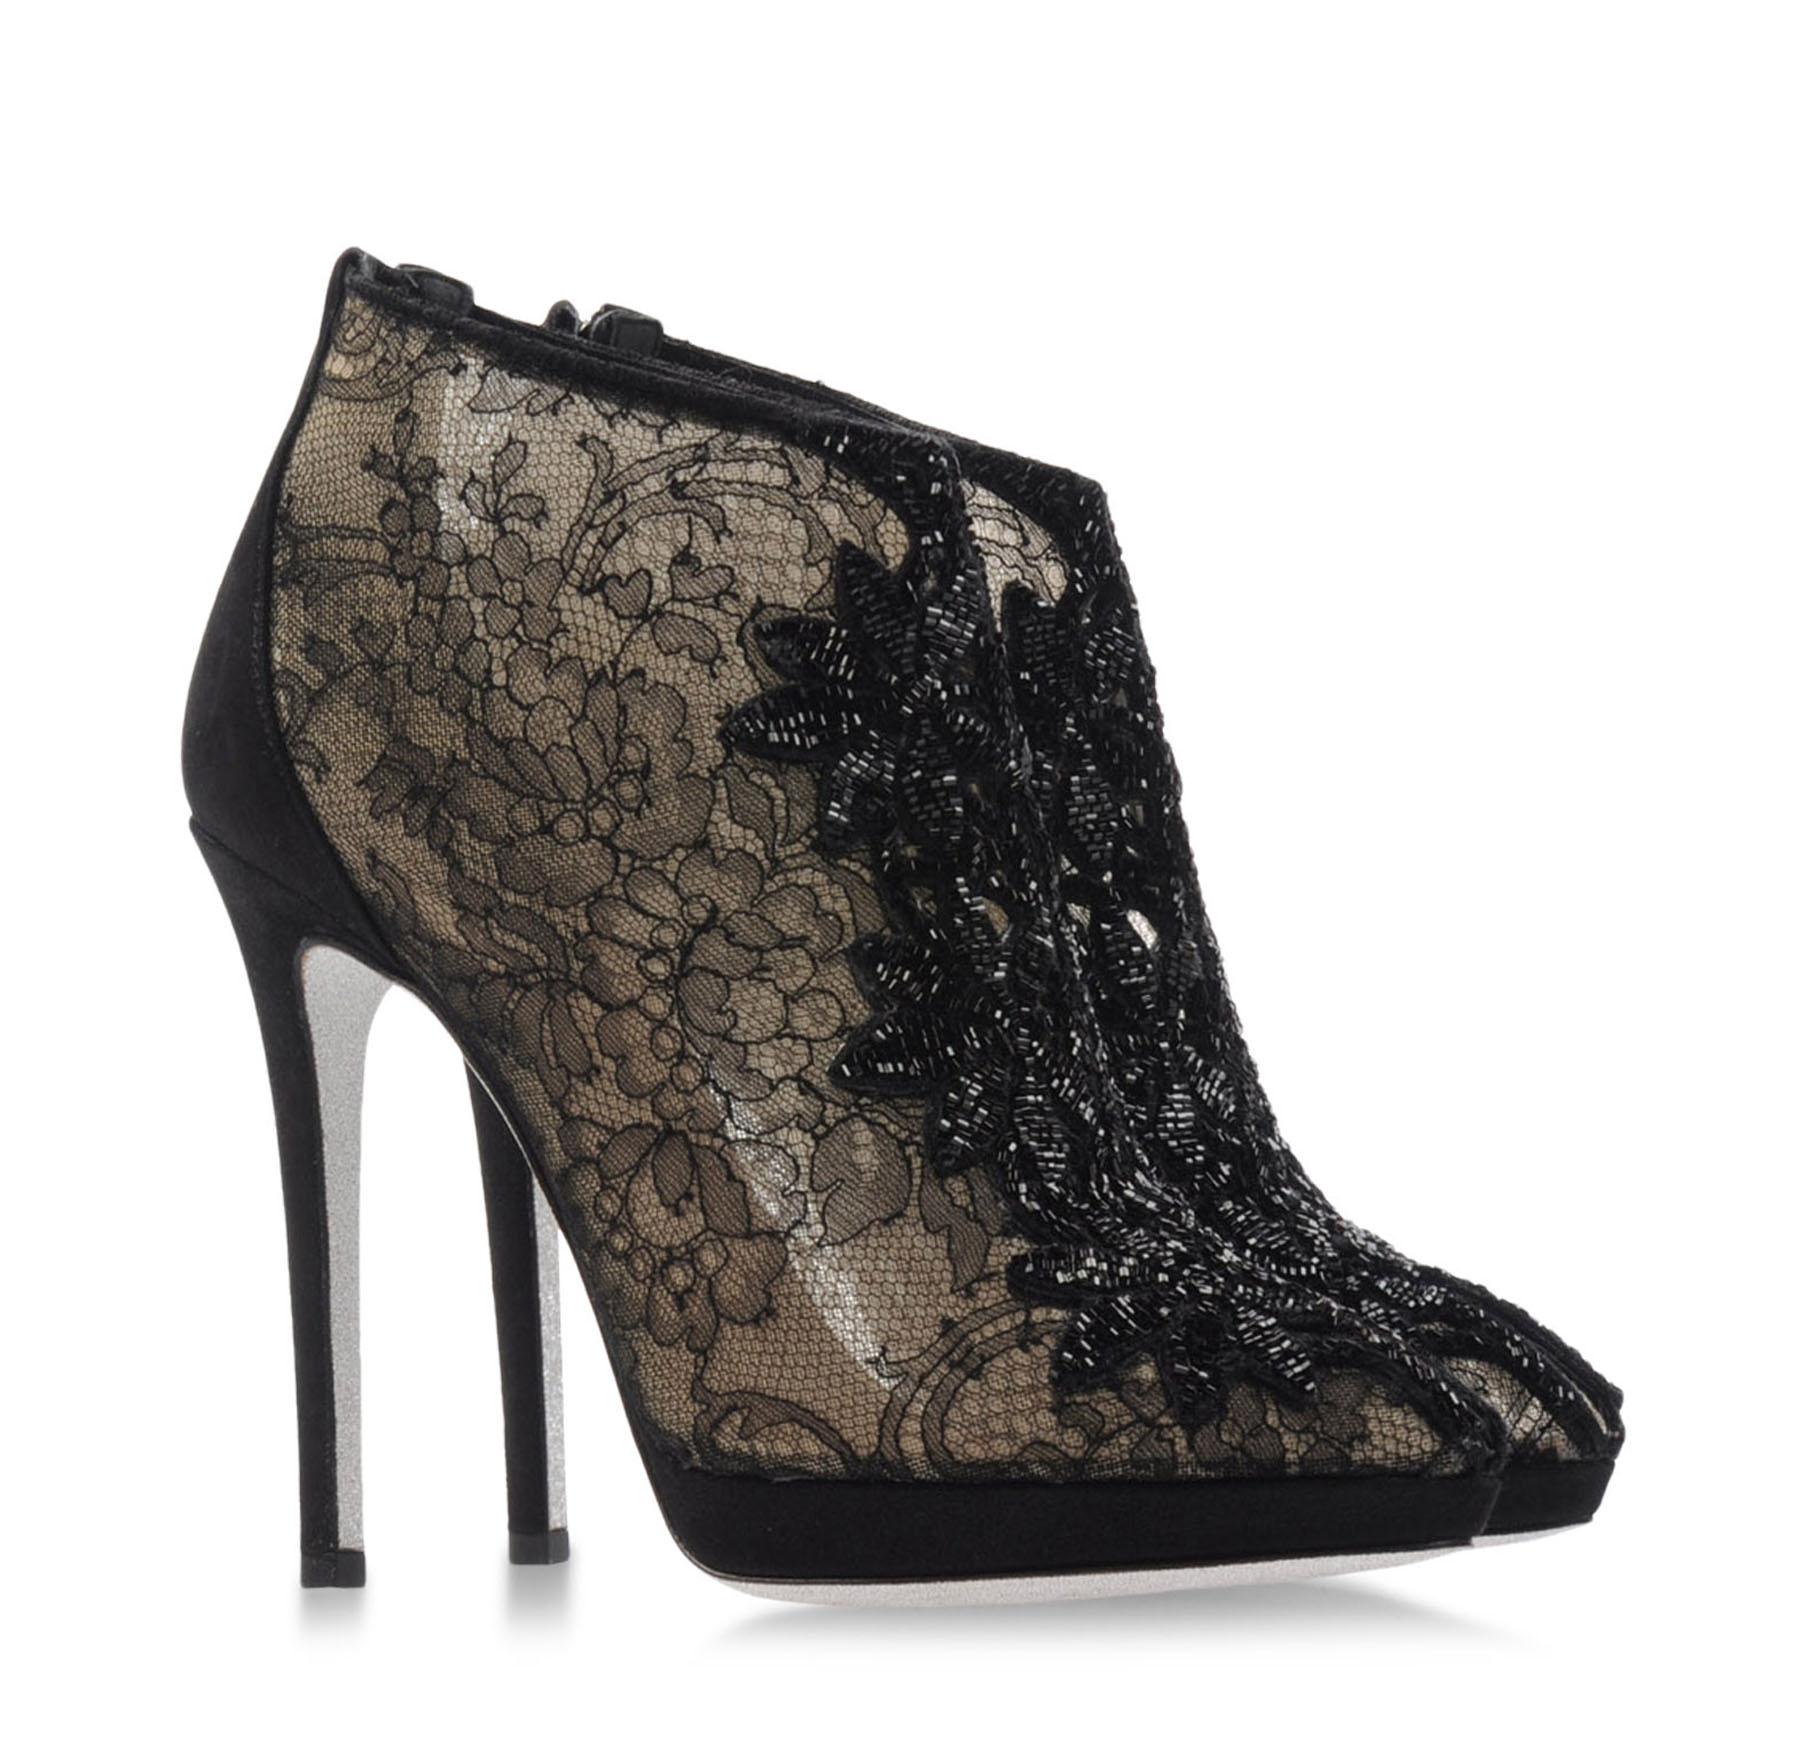 New Rene Caovilla Black Lace Beaded Ankle Booties
Designer size 40 - US 10
This sexy ankle boot is a great addition to your fall cocktail or evening wardrobe. Black floral lace, beads detailed, cutout narrow toe line, glitter signature sole, back